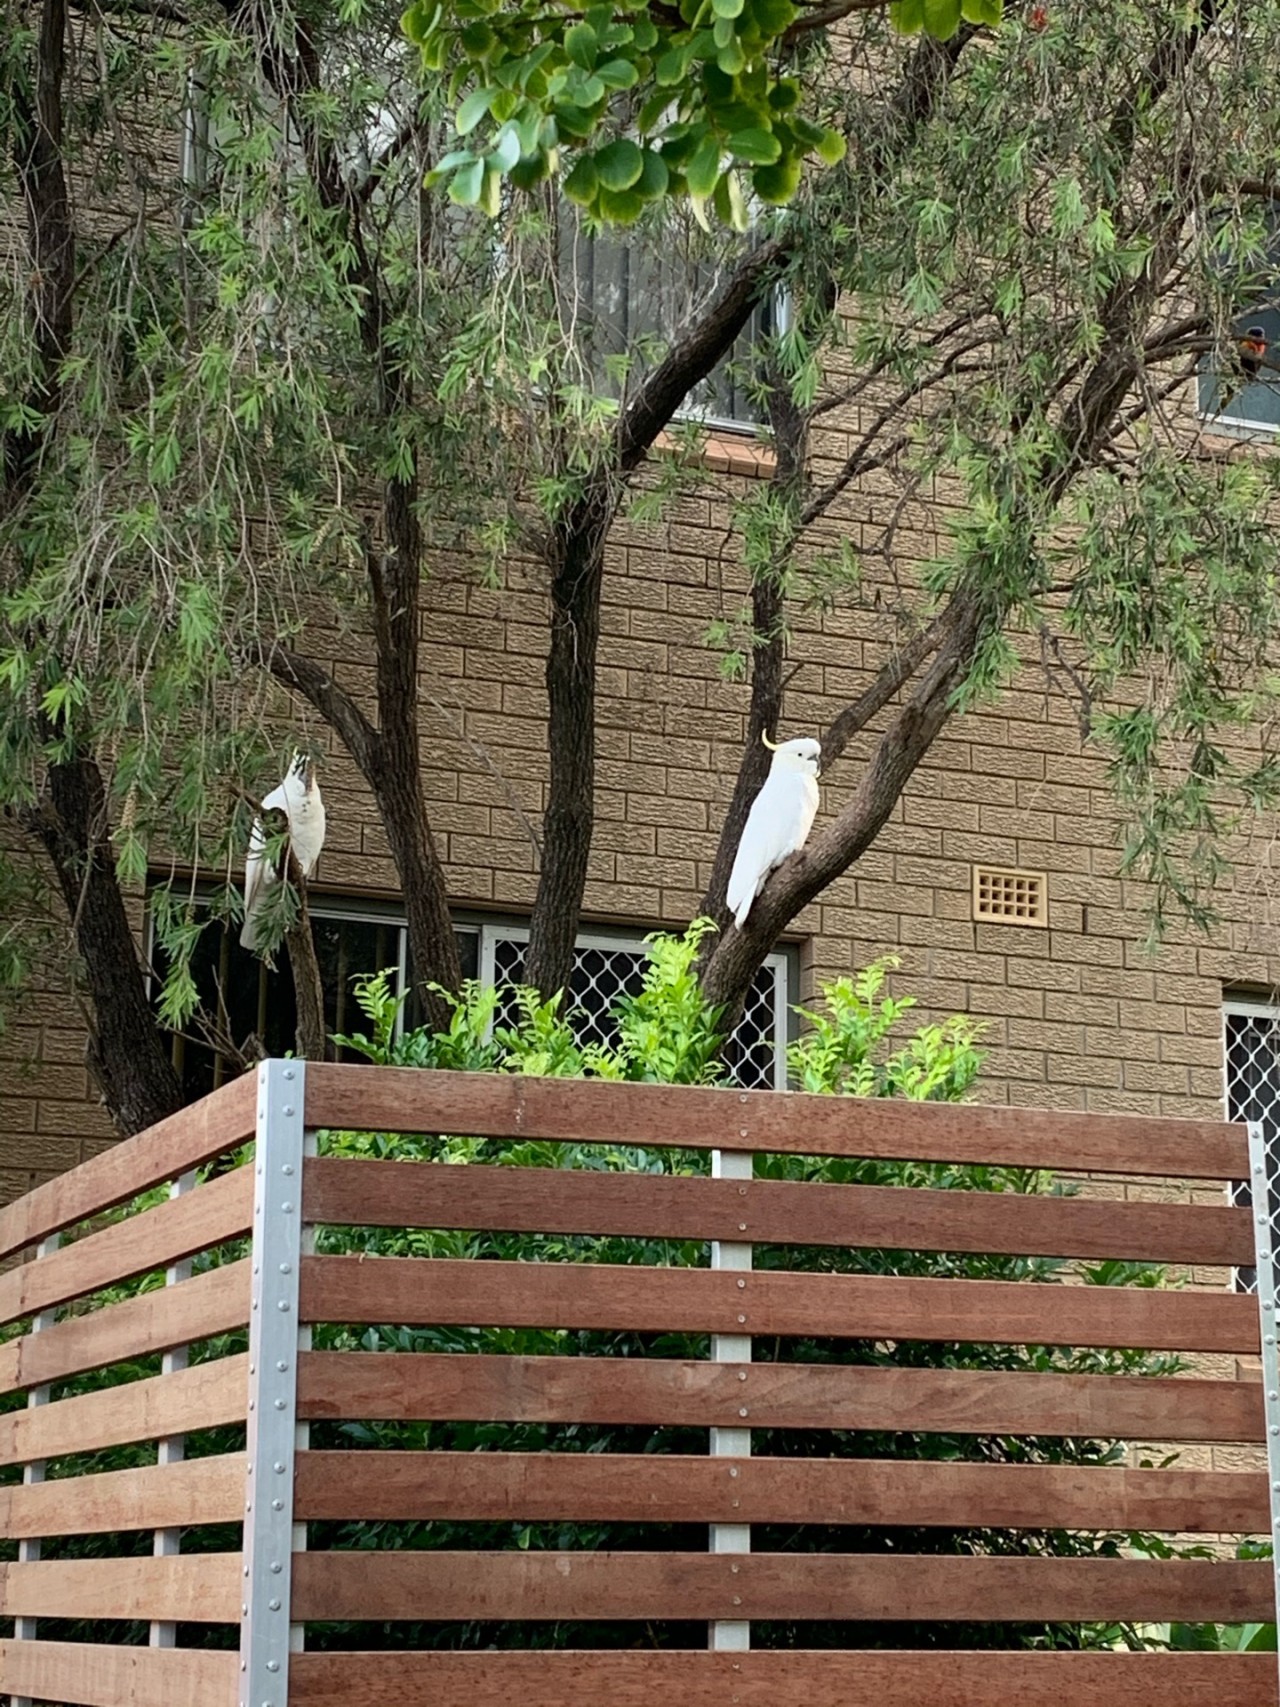 Sulphur-crested Cockatoo in Big City Birds App: 7 cockatoos waiting for a feed it appears .. spotted by Laurie McGuirk on 11.12.2020